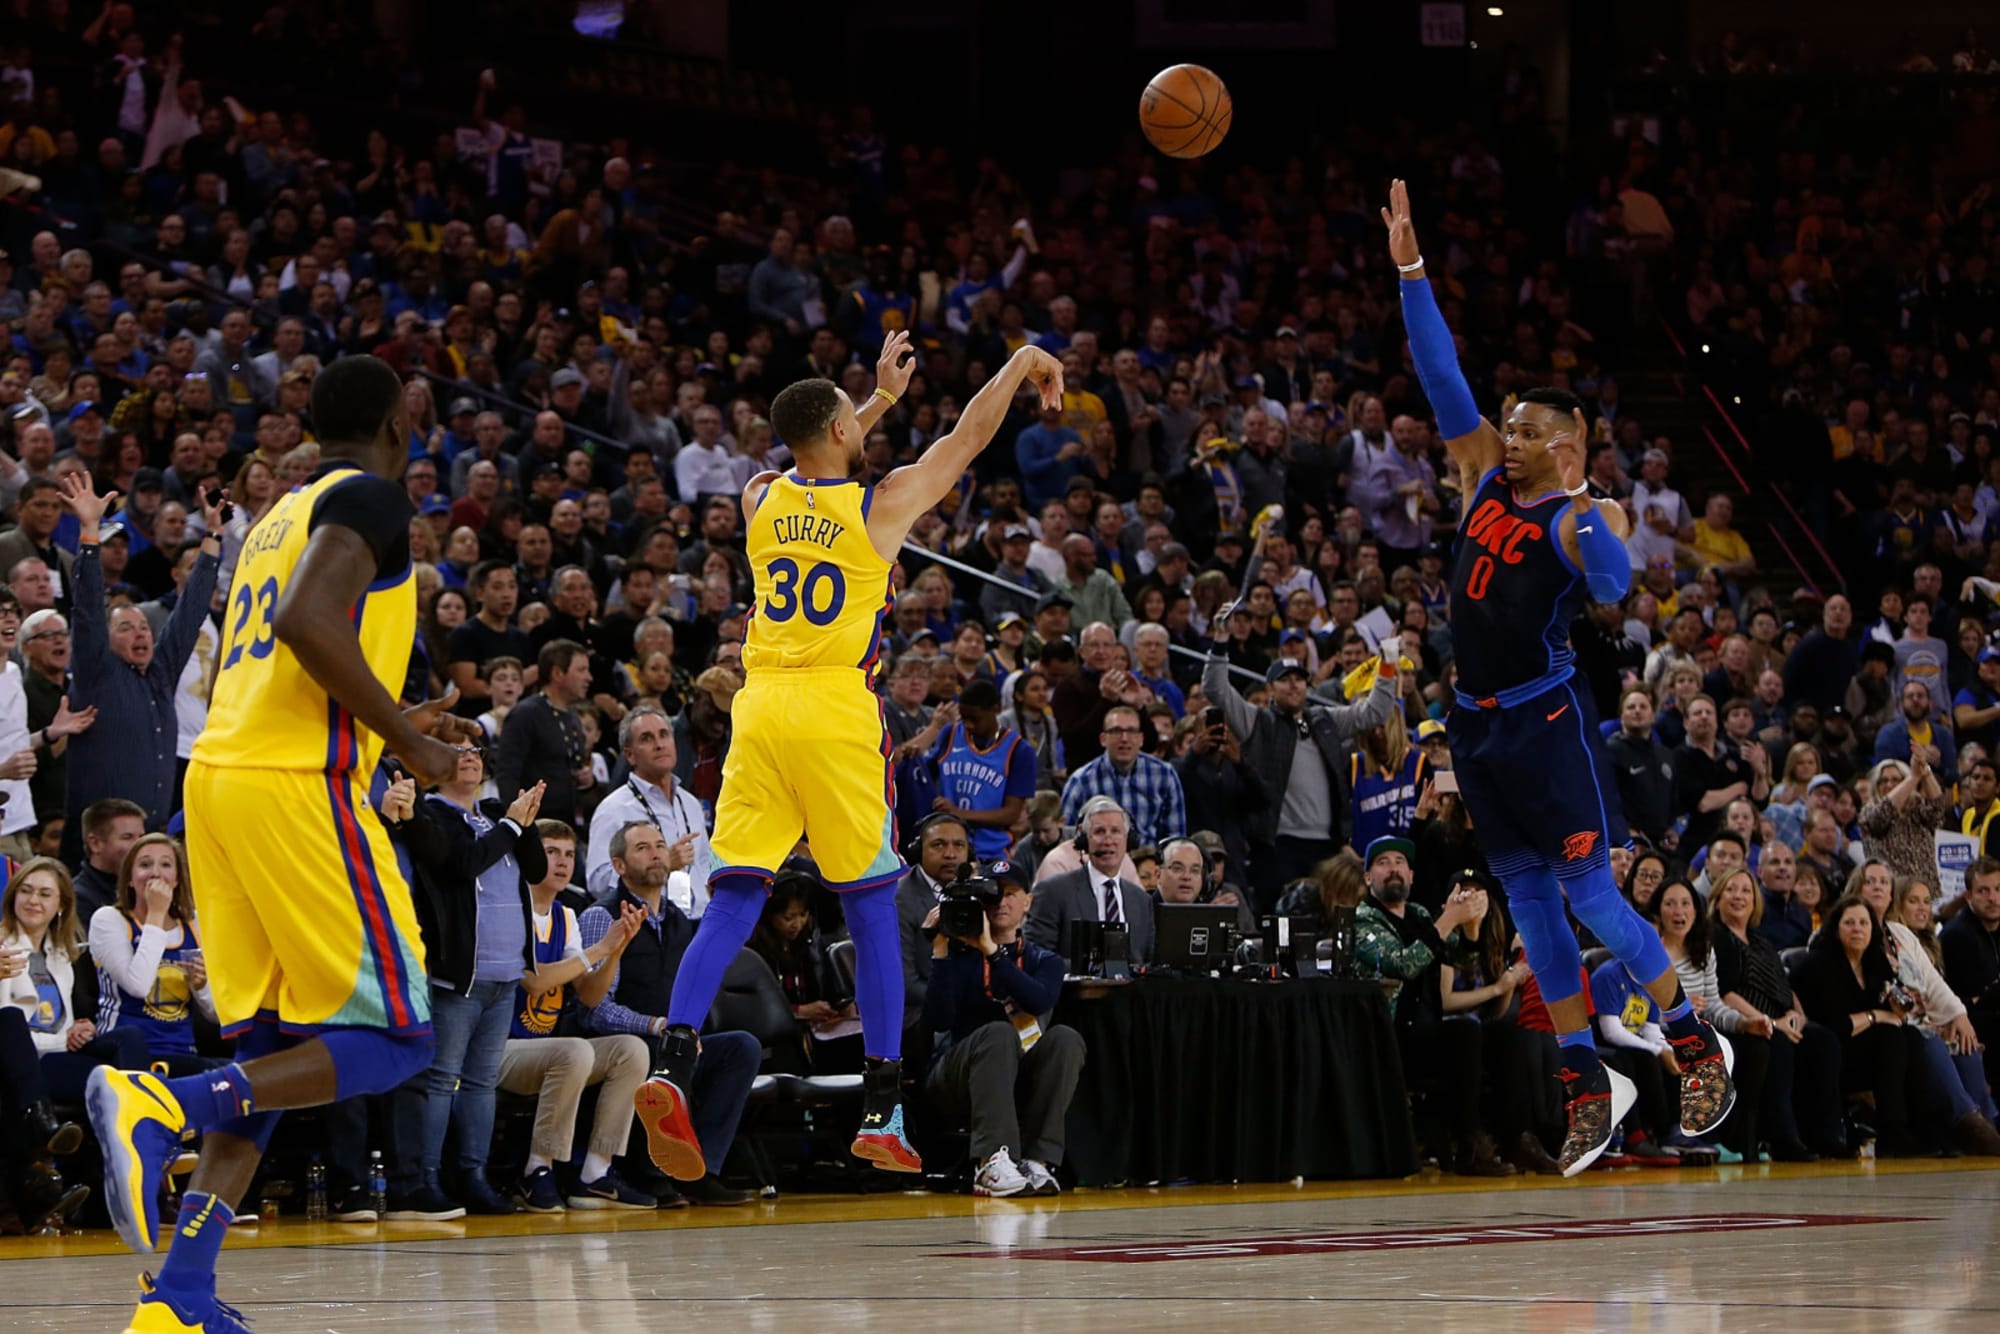 Stephen Curry, Seth Curry and Dirk Nowitzki set for 3-point